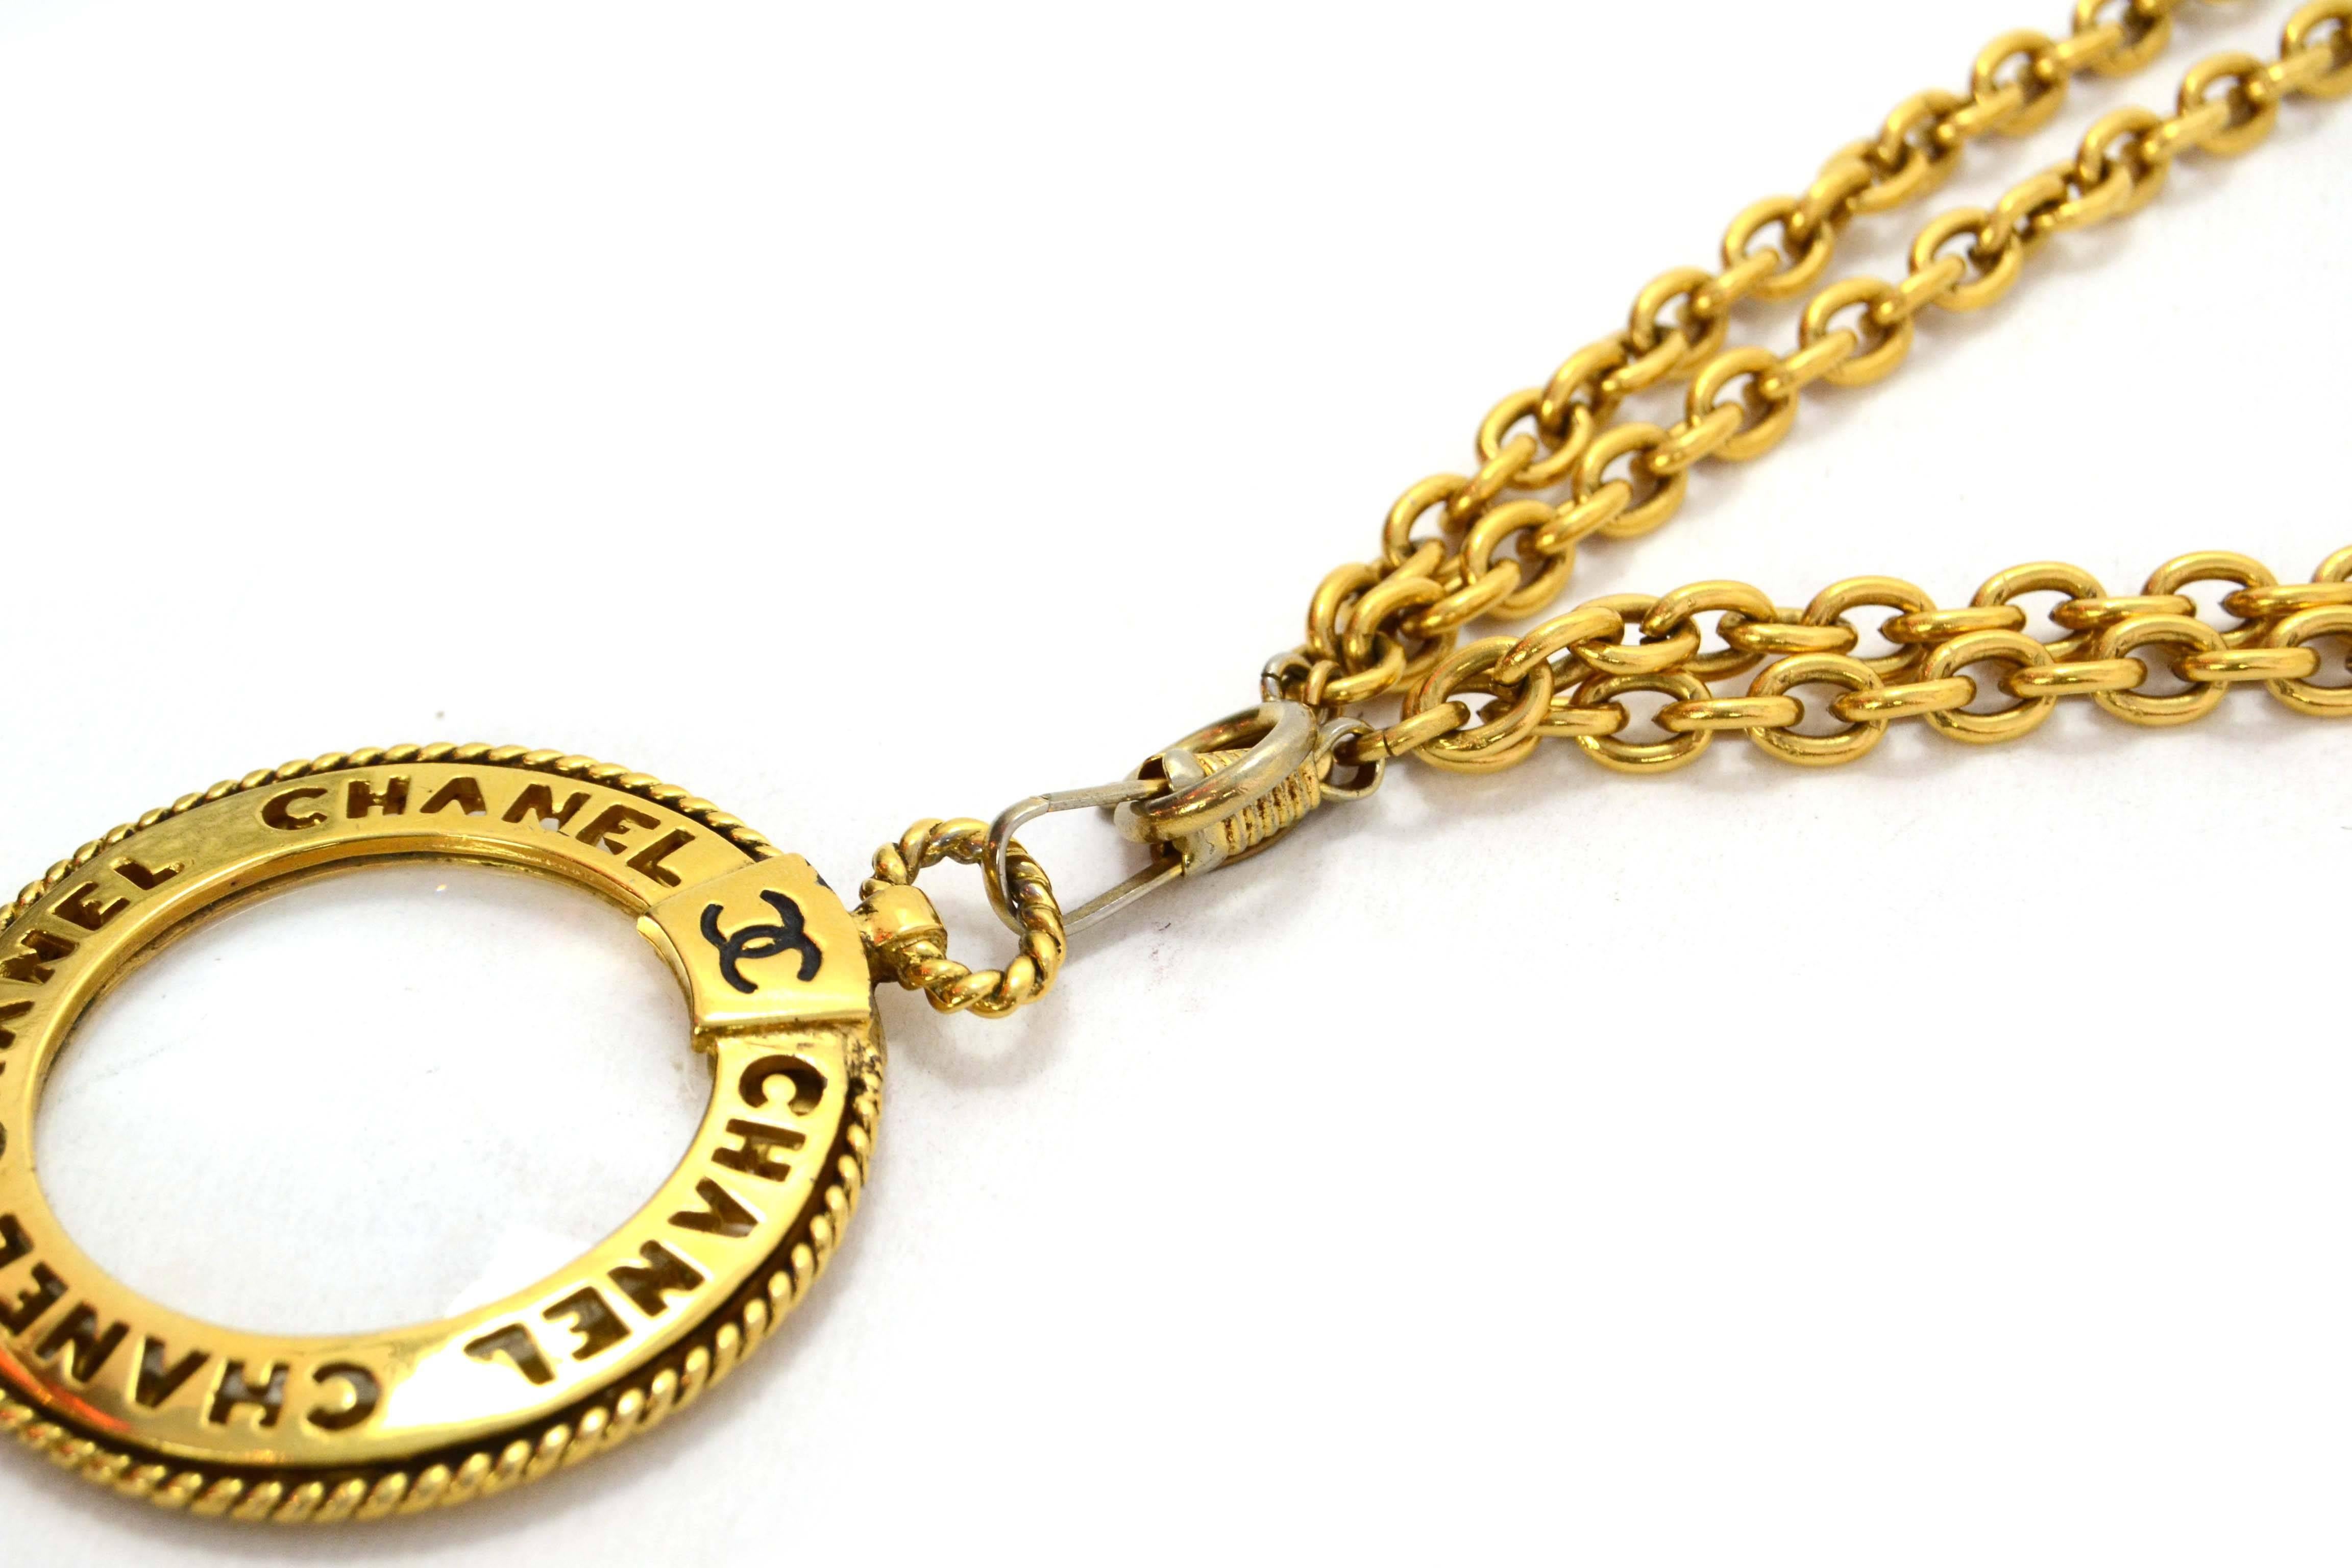 vintage chanel magnifying glass necklace